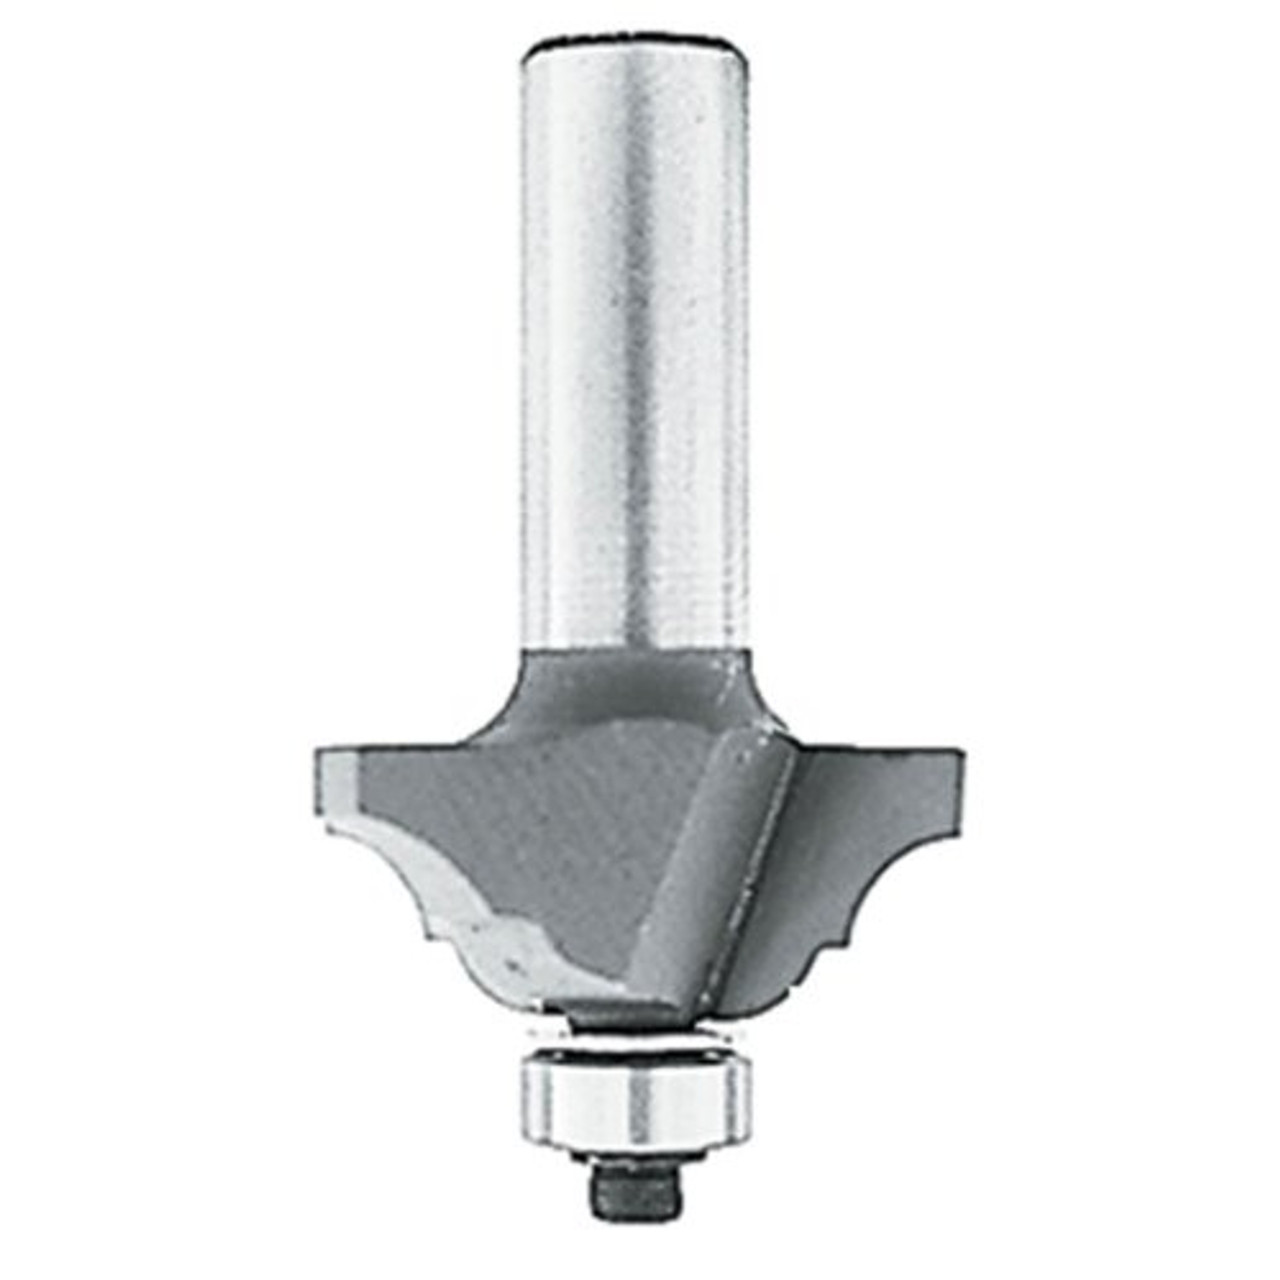 Makita 733125-2A Classical Router Bit, 1/4-Inch Shank